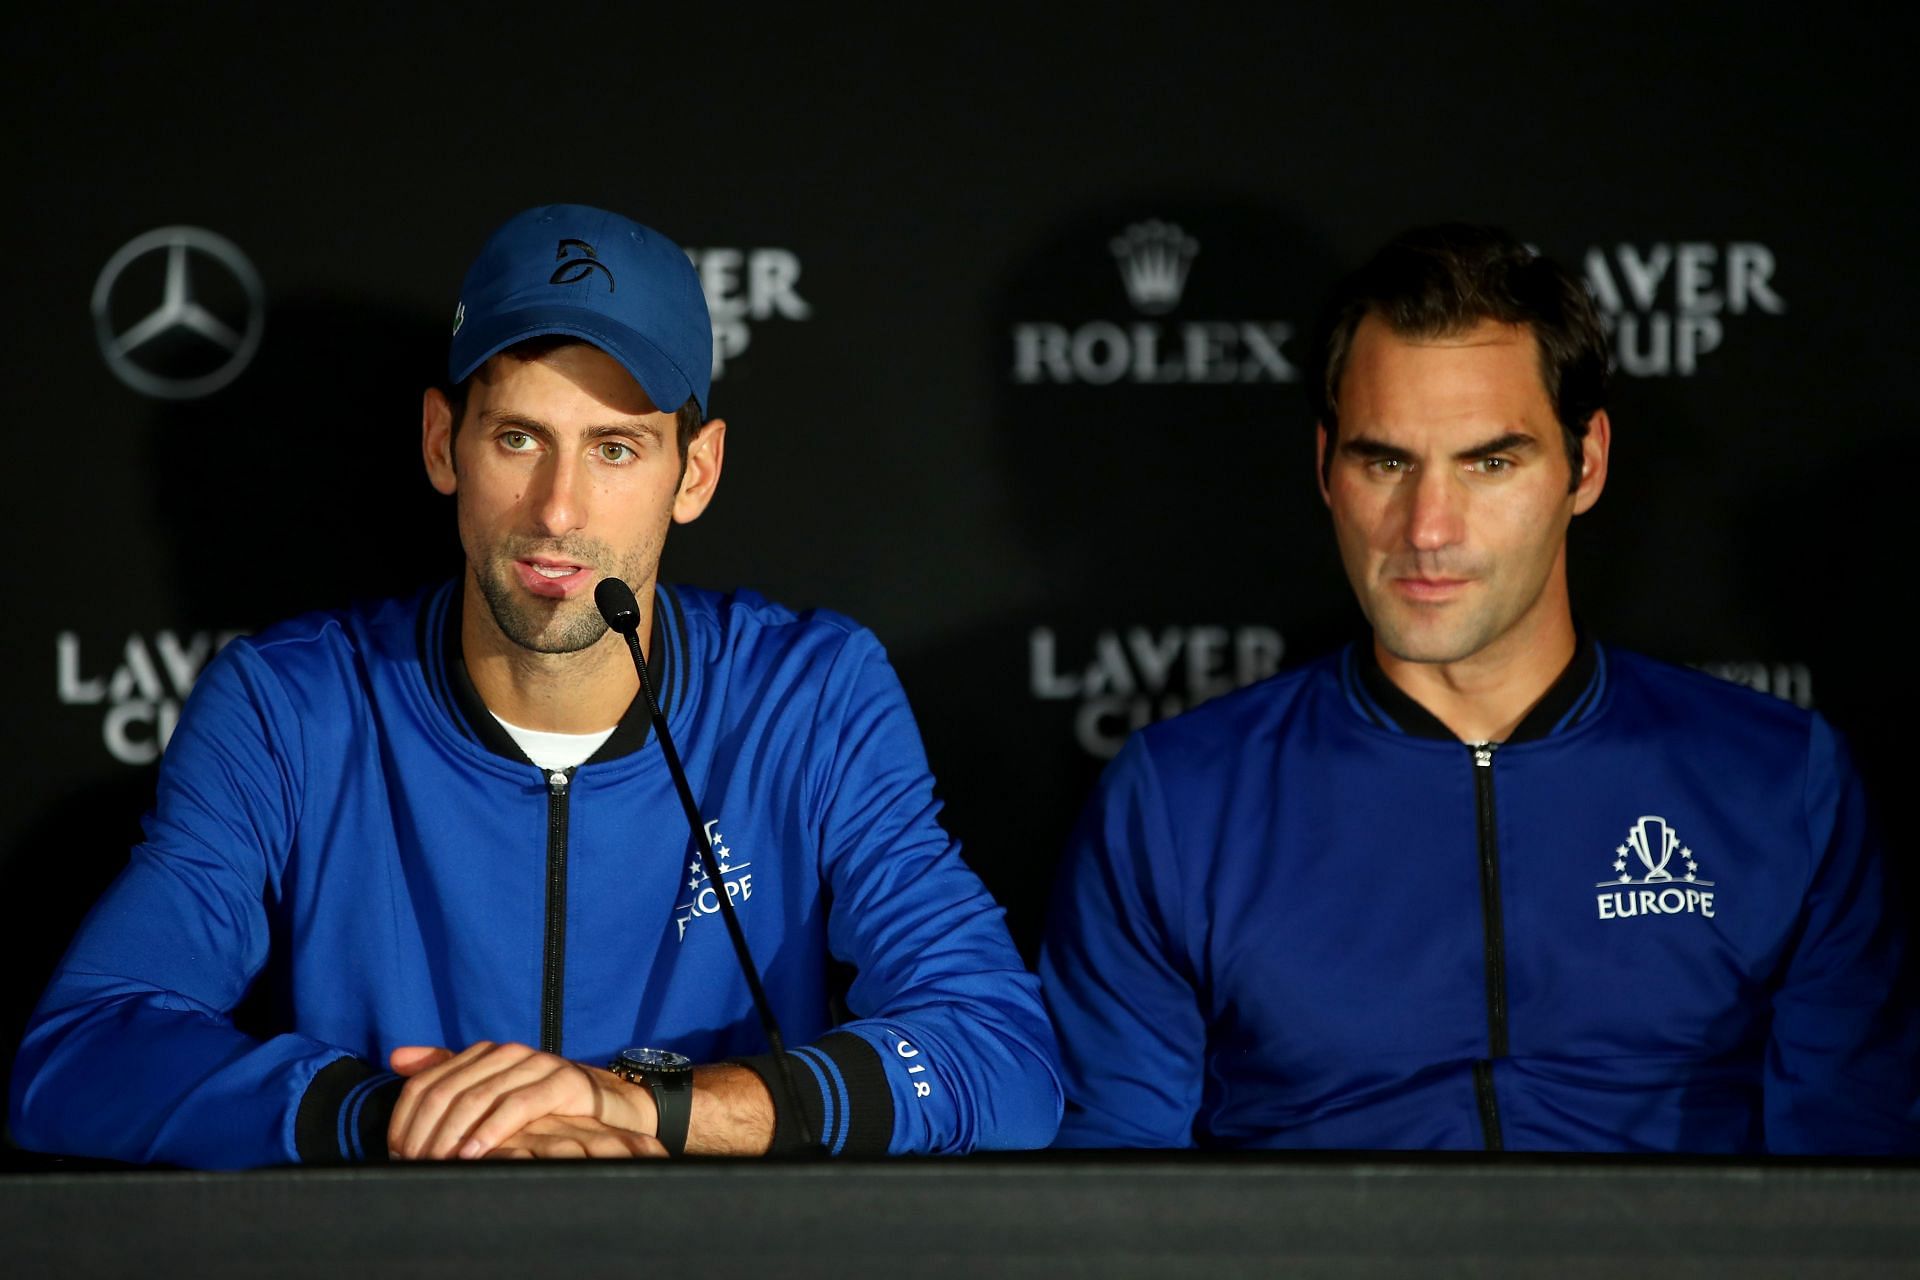 Djokovic and Federer lost their doubles rubber at the 2018 Laver Cup